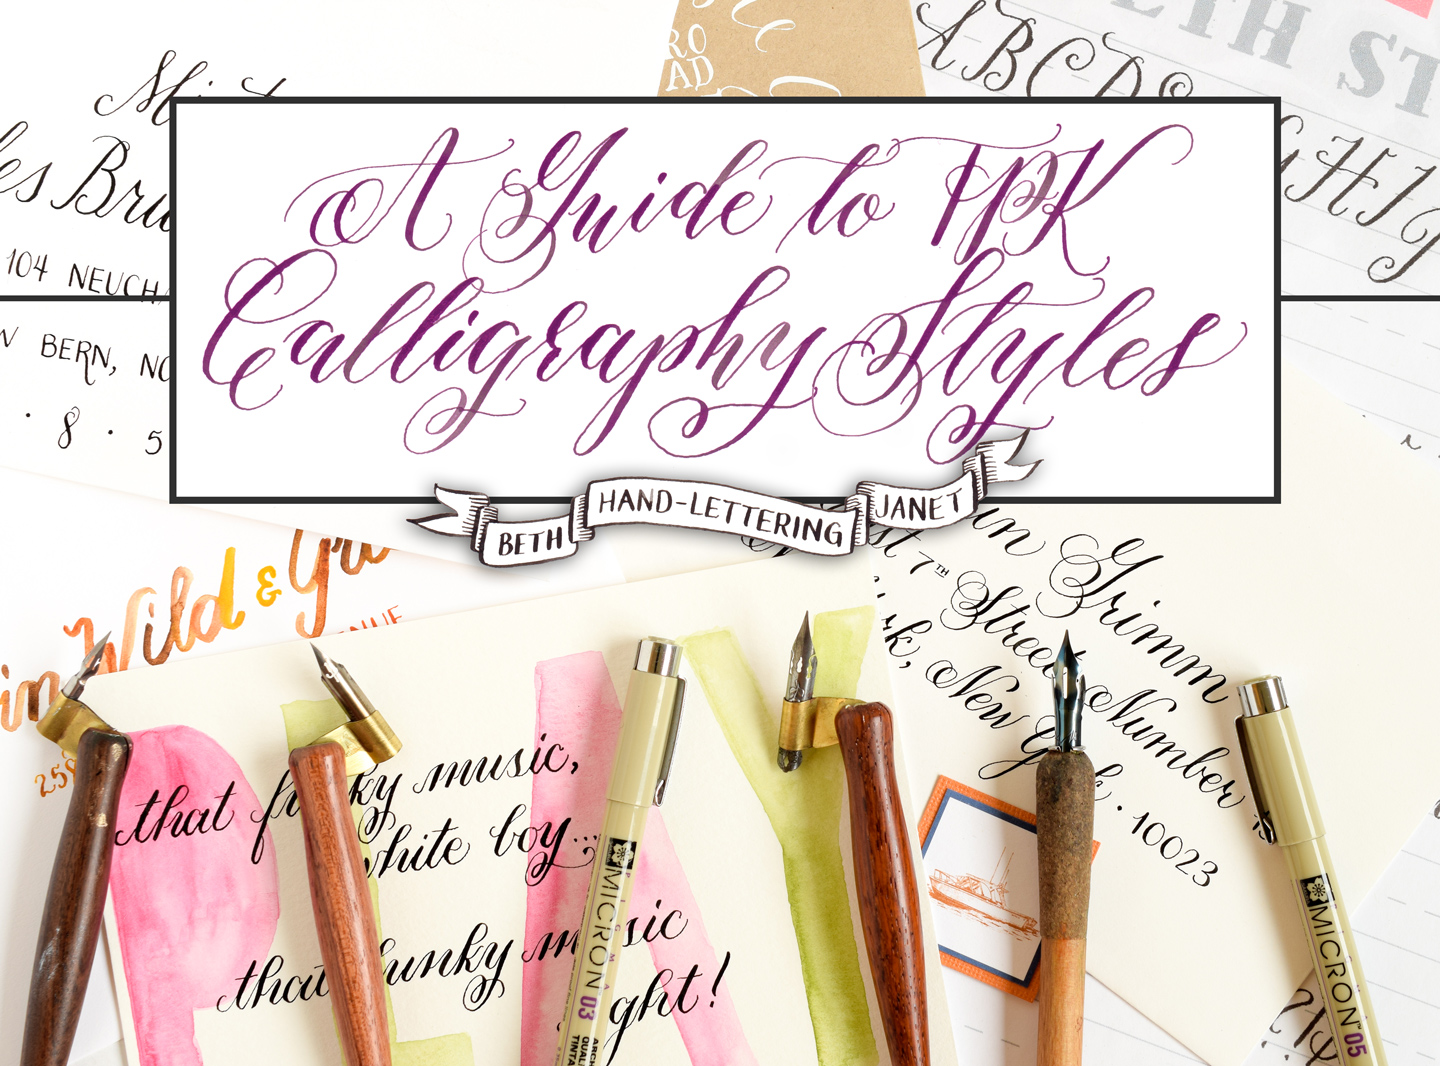 A Guide to TPK Calligraphy Styles: Beth, Janet, Hand-Lettering